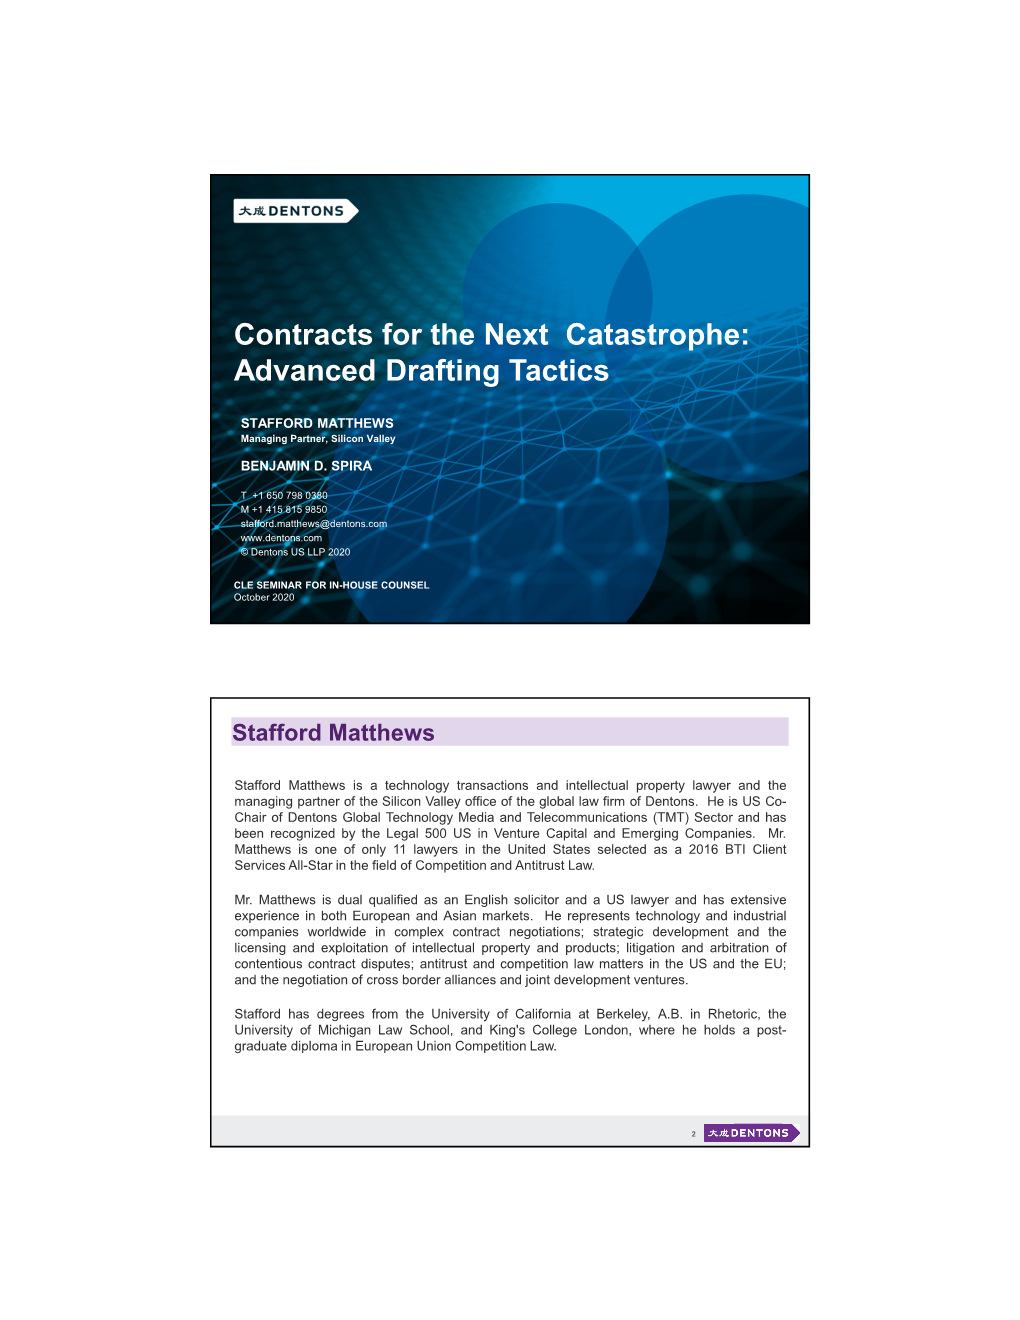 Contracts for the Next Catastrophe: Advanced Drafting Tactics